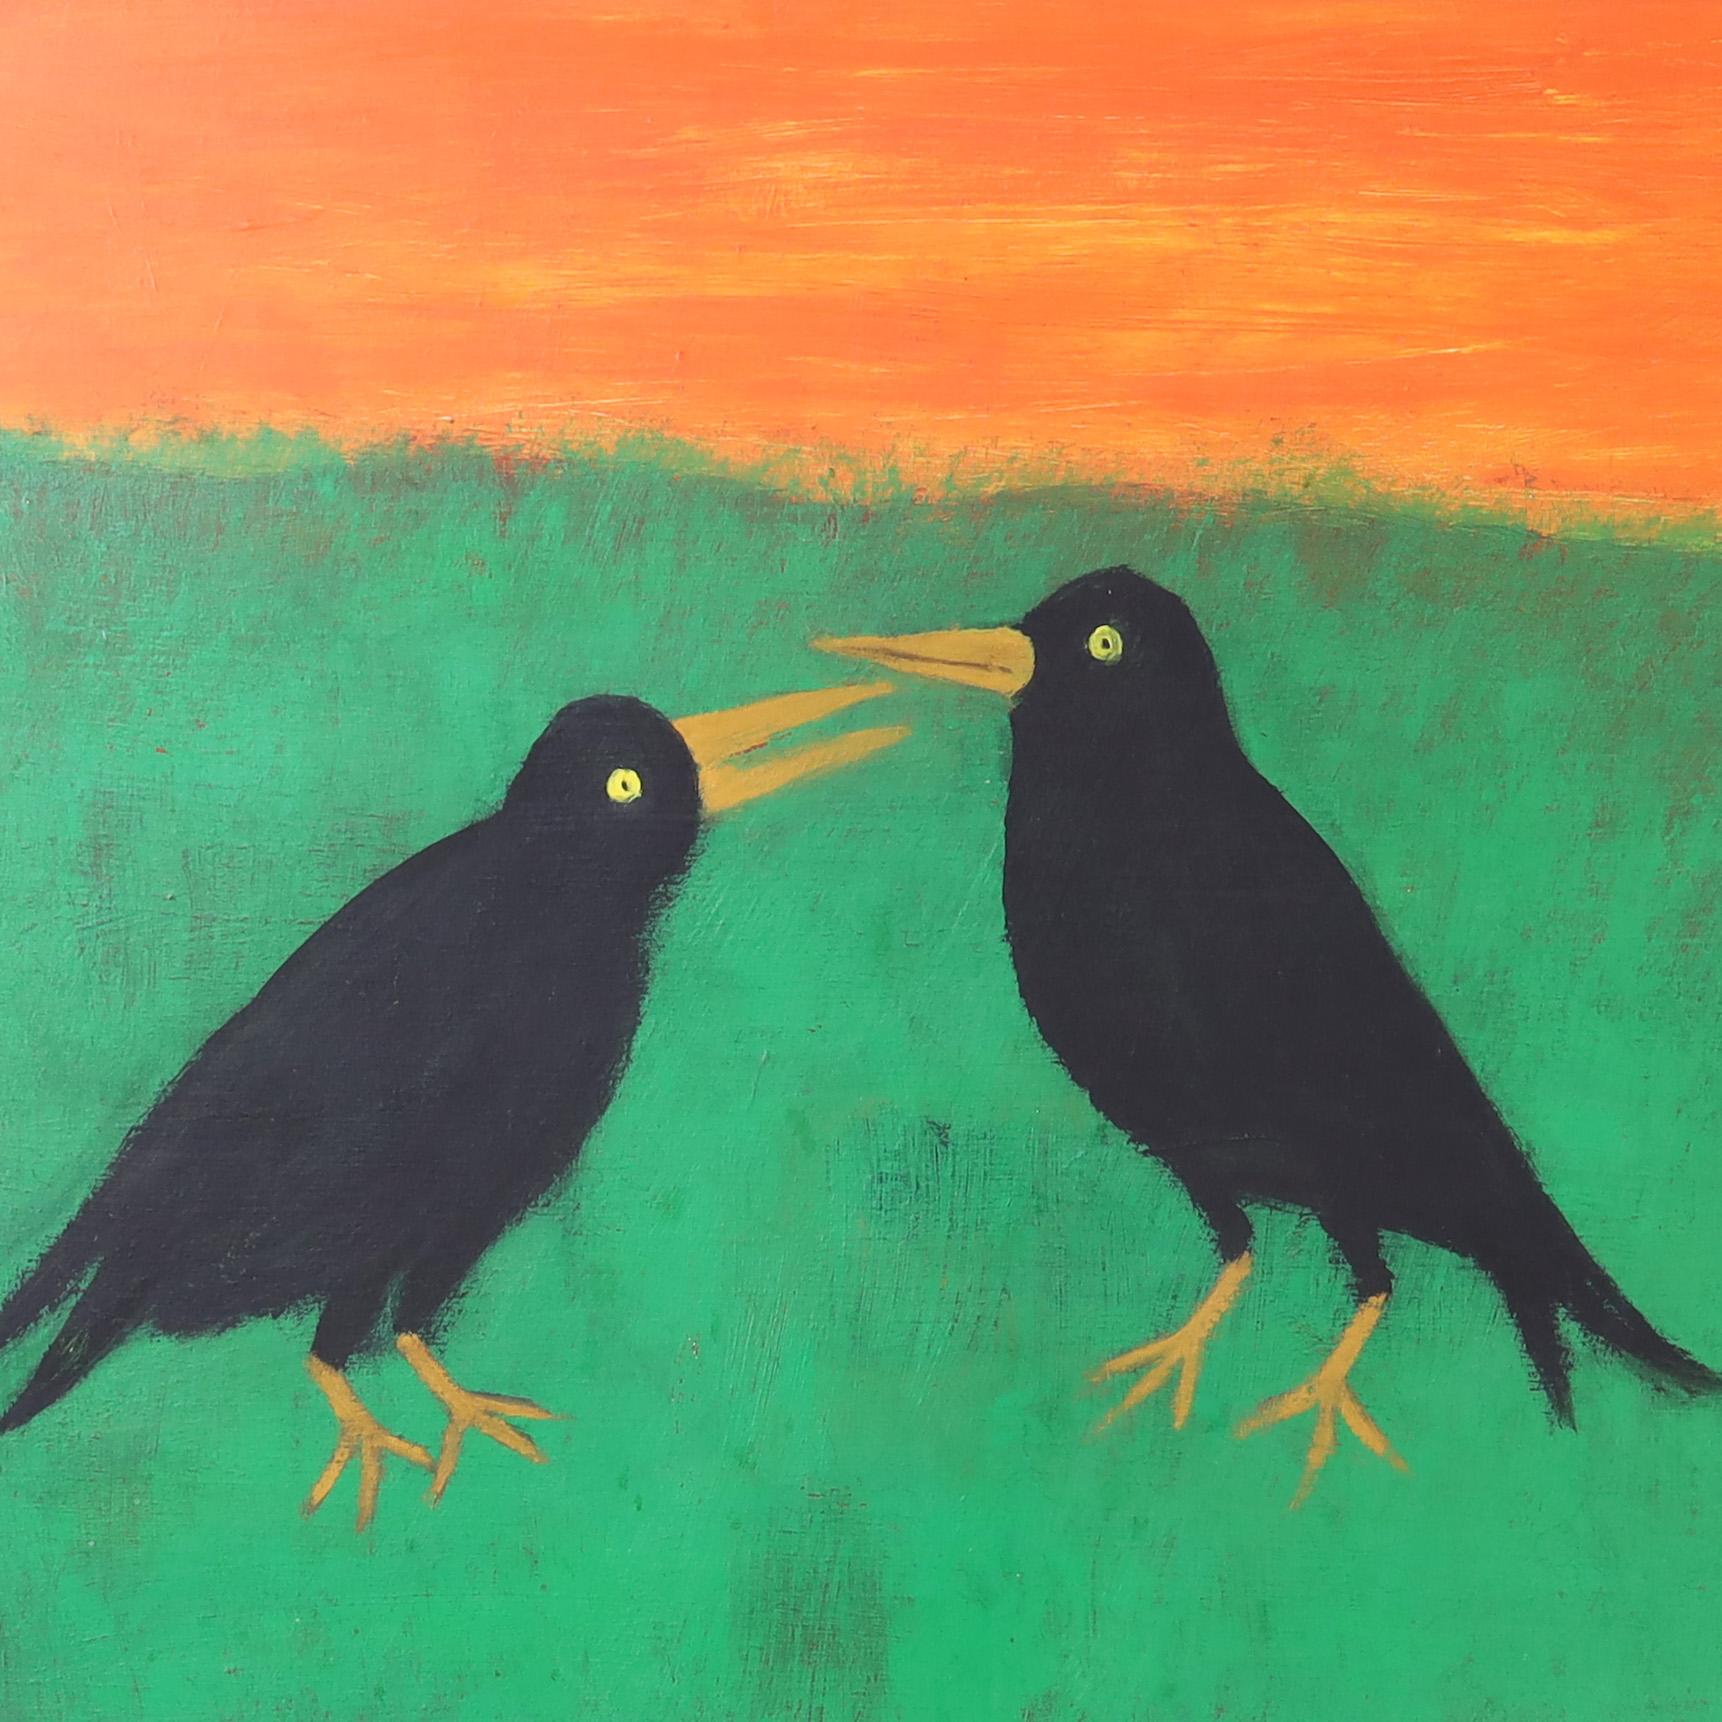 Charming Mid Century acrylic painting on board of two crows or ravens with quirky expressions under a blazing sky executed in a loose naive style. Presented in the original anodized gold aluminum frame.